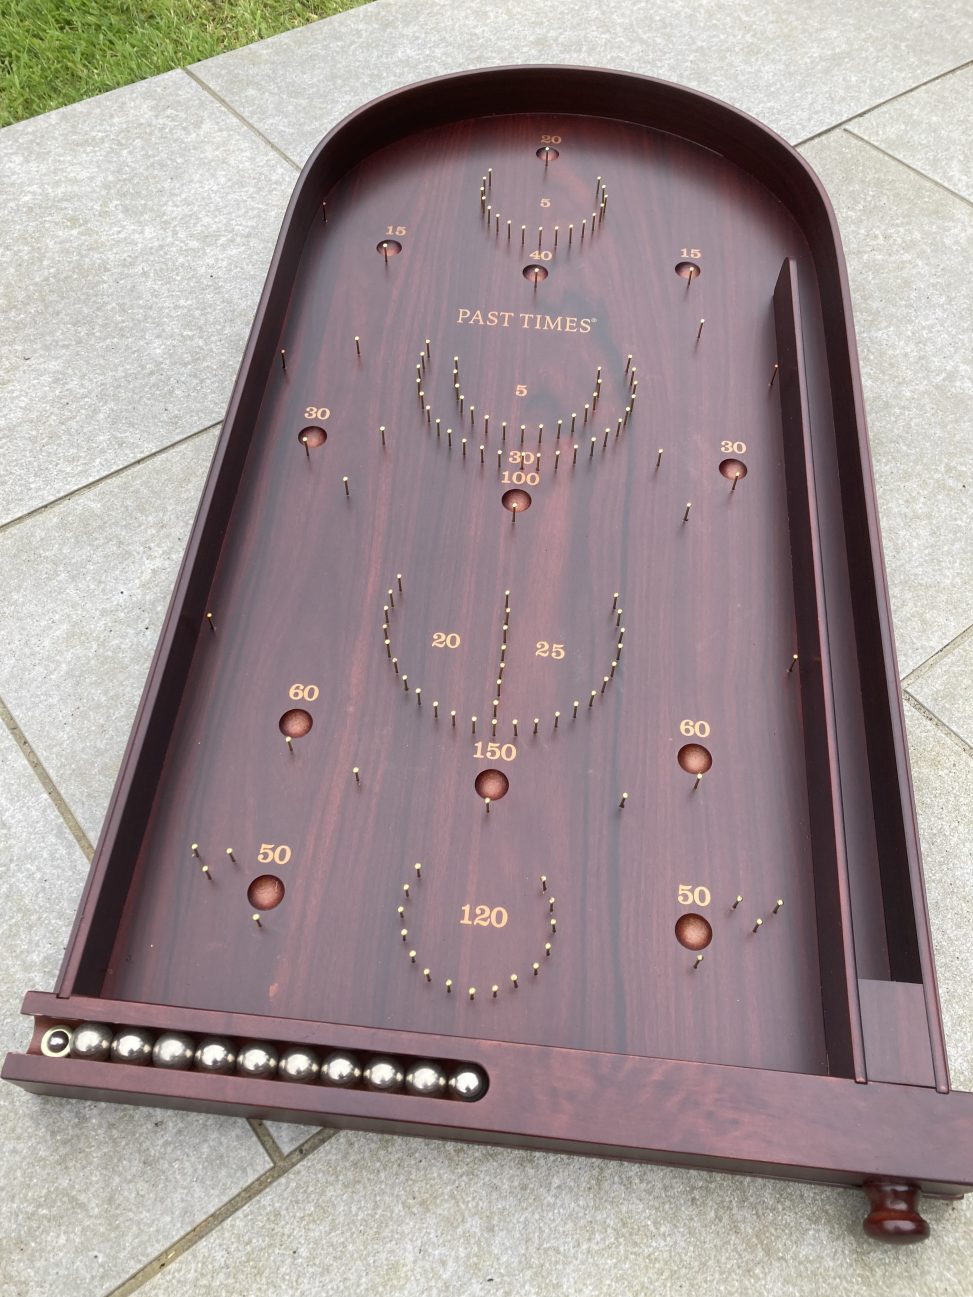 Bagatelle table top game to hire Southampton